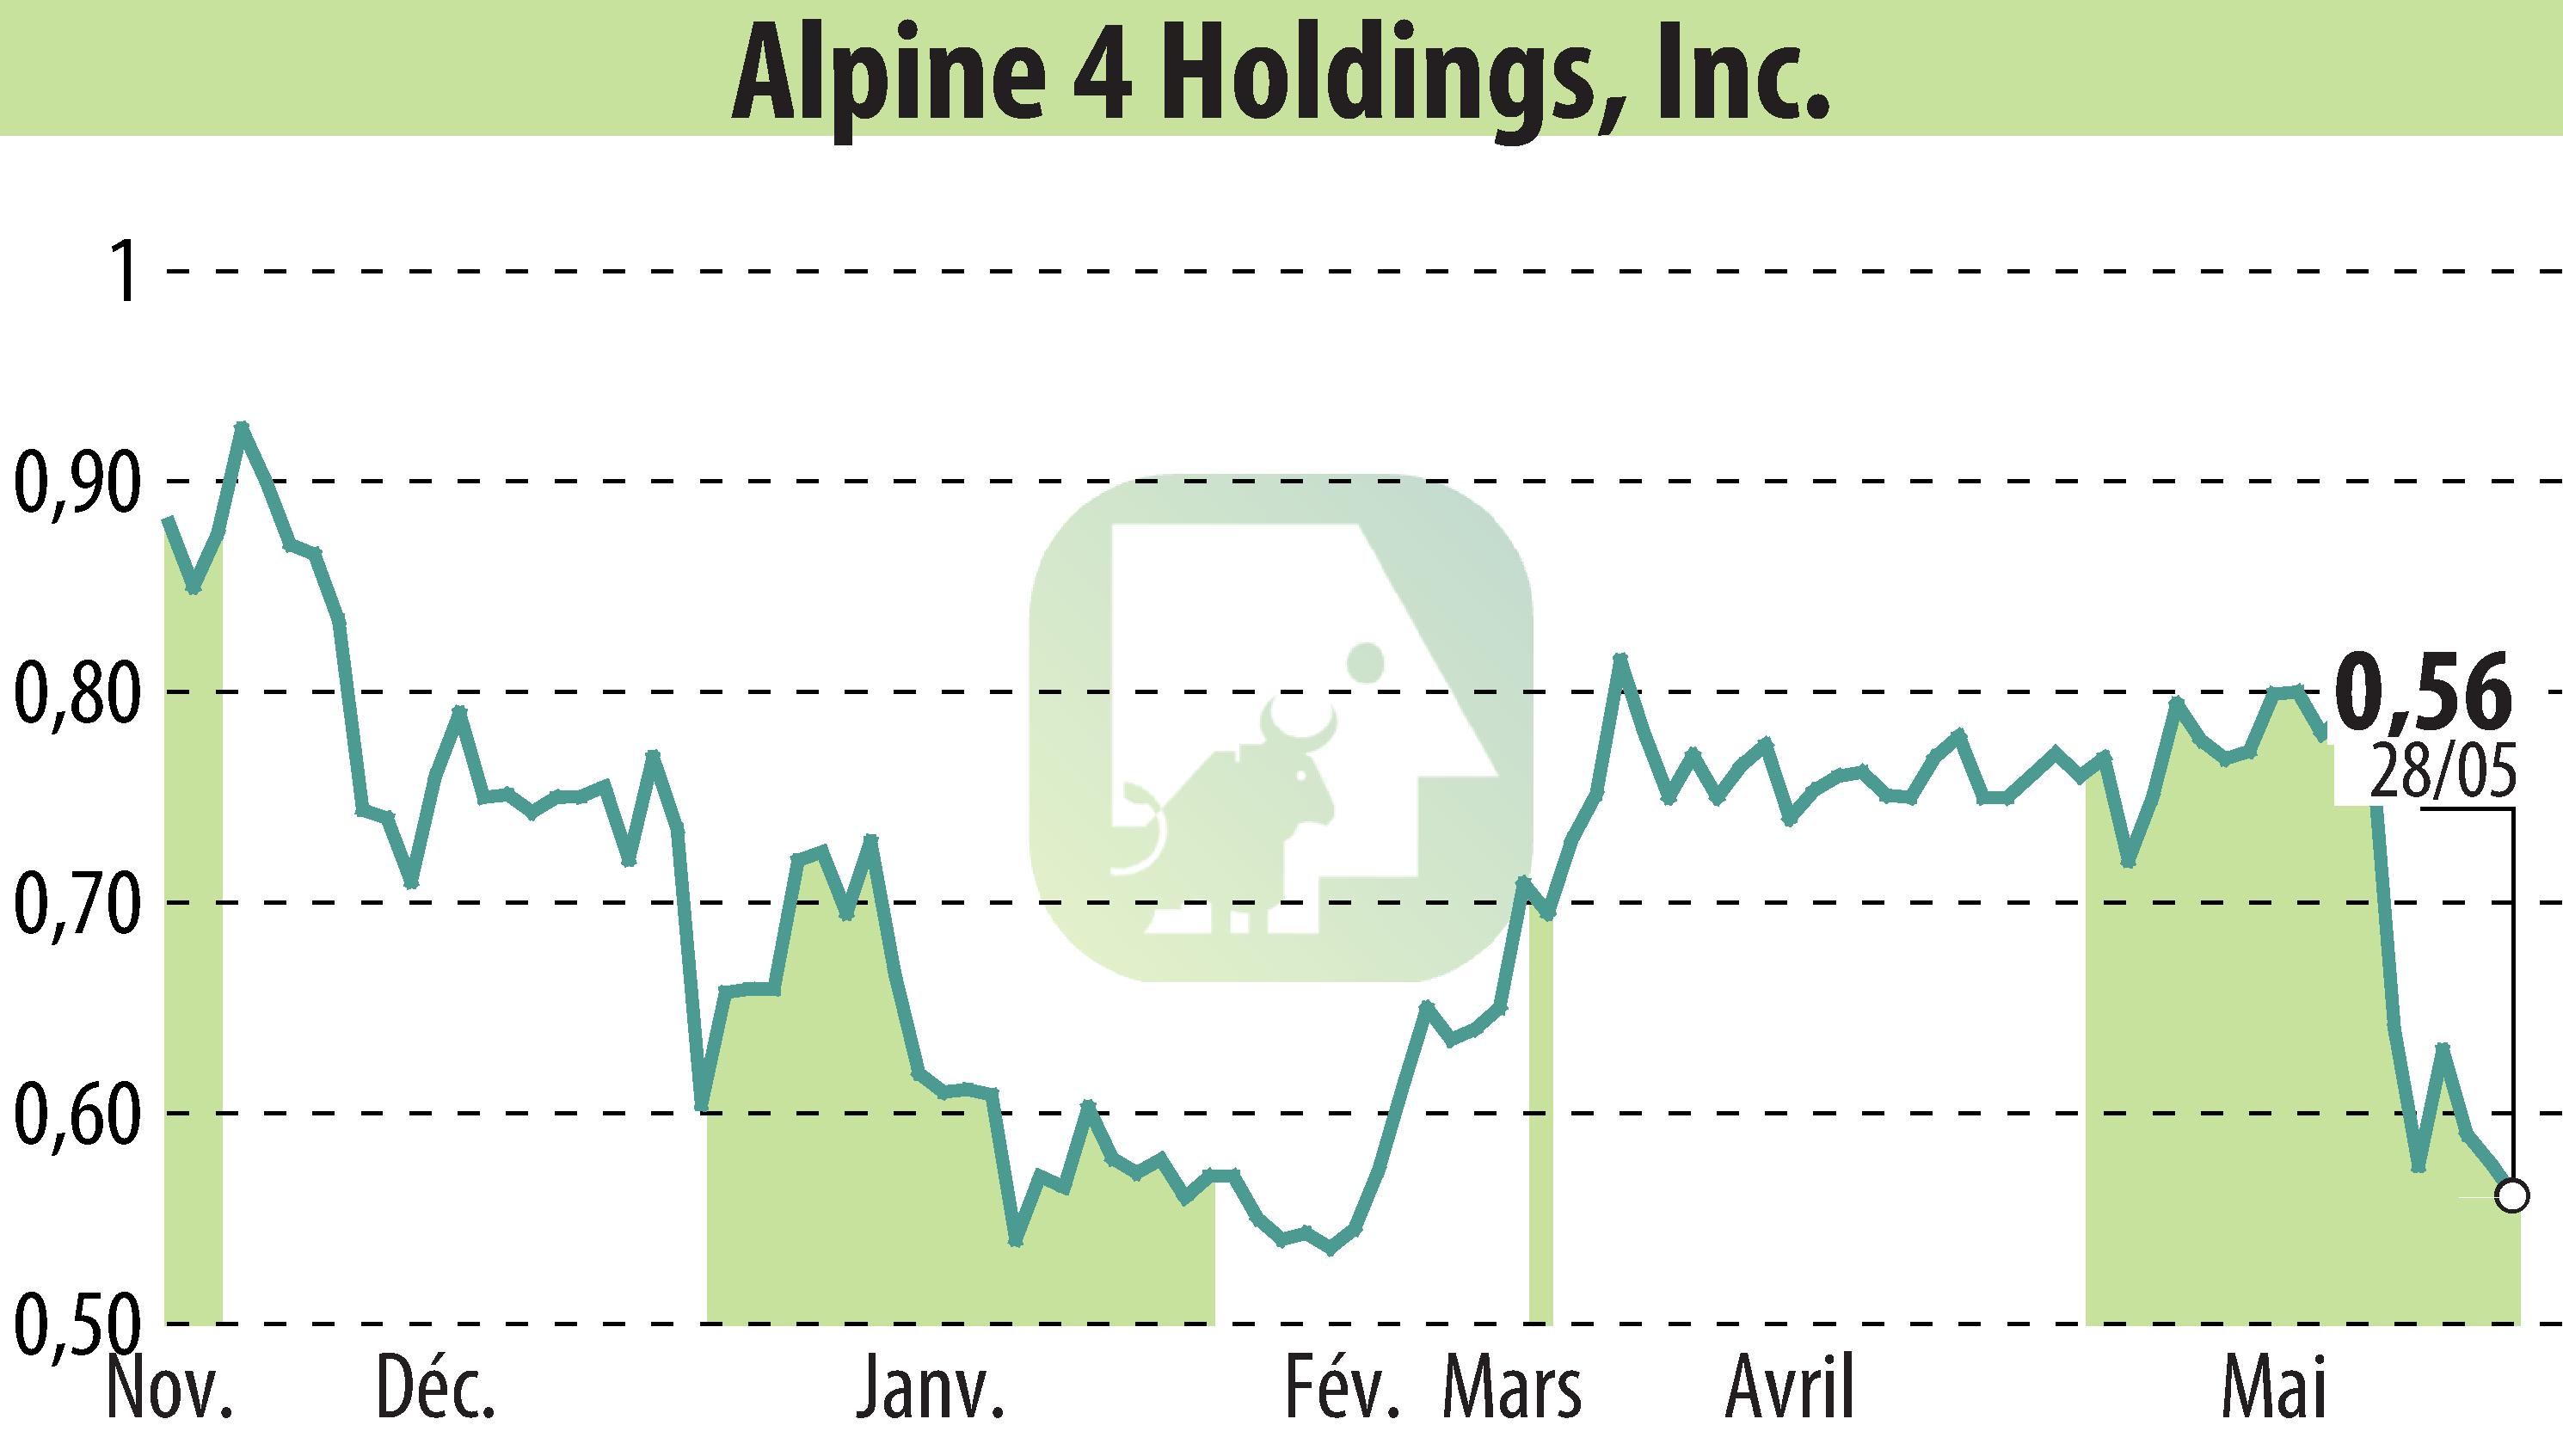 Stock price chart of Alpine 4 Holdings, Inc. (EBR:ALPP) showing fluctuations.